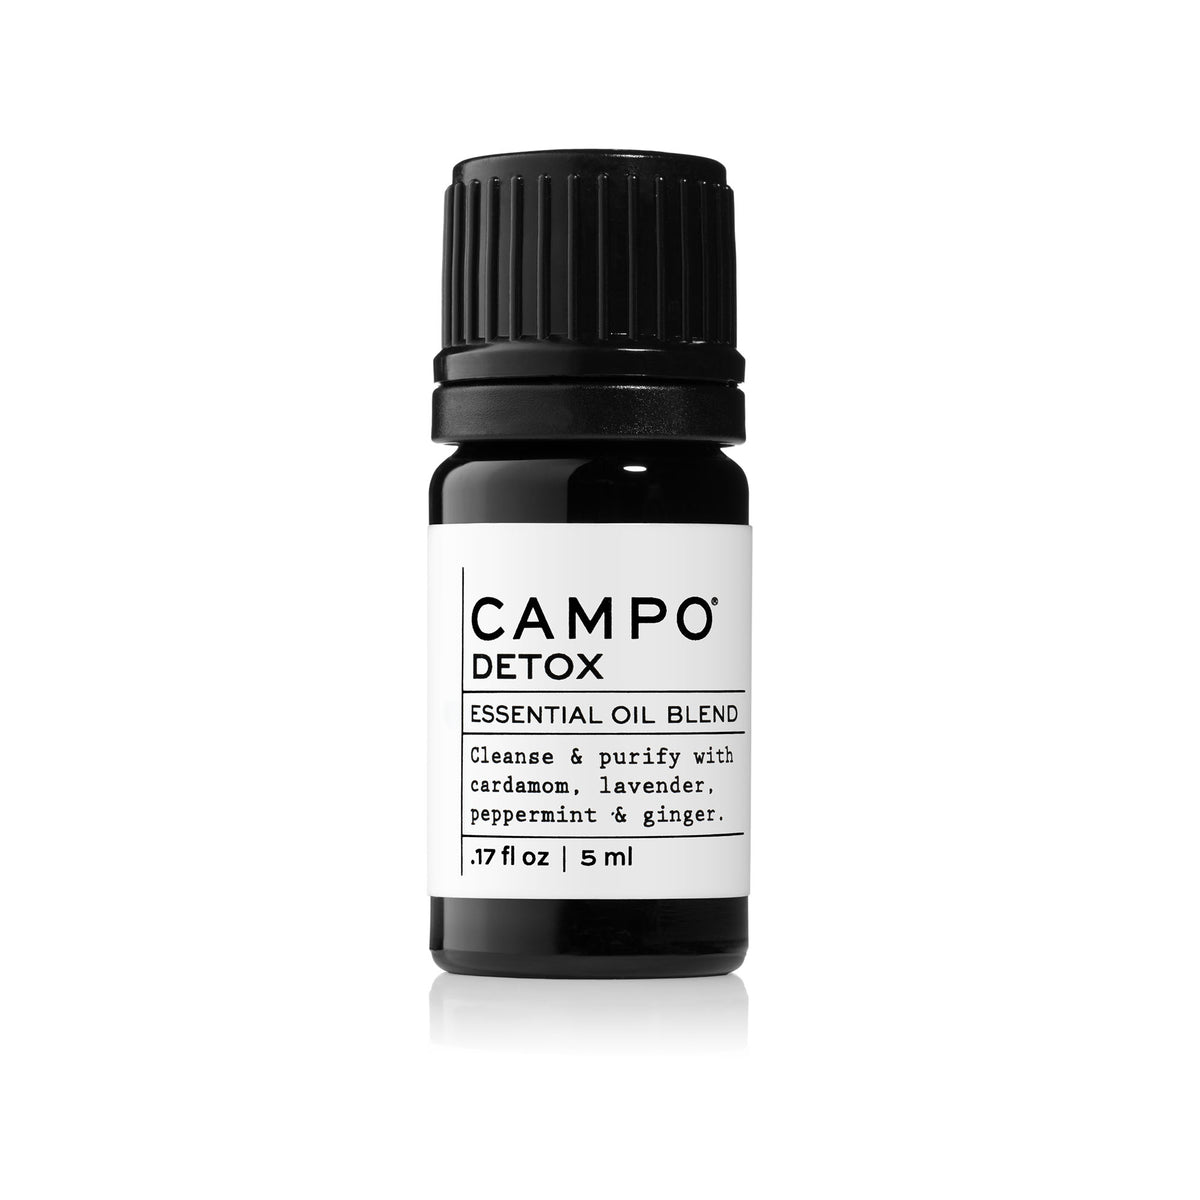 Campo Beauty DETOX Blend 5 ml Essential Oil. Help eliminate toxins naturally with this 100% natural essential oil blend of Cardamom, Lavender, Peppermint &amp; Ginger.